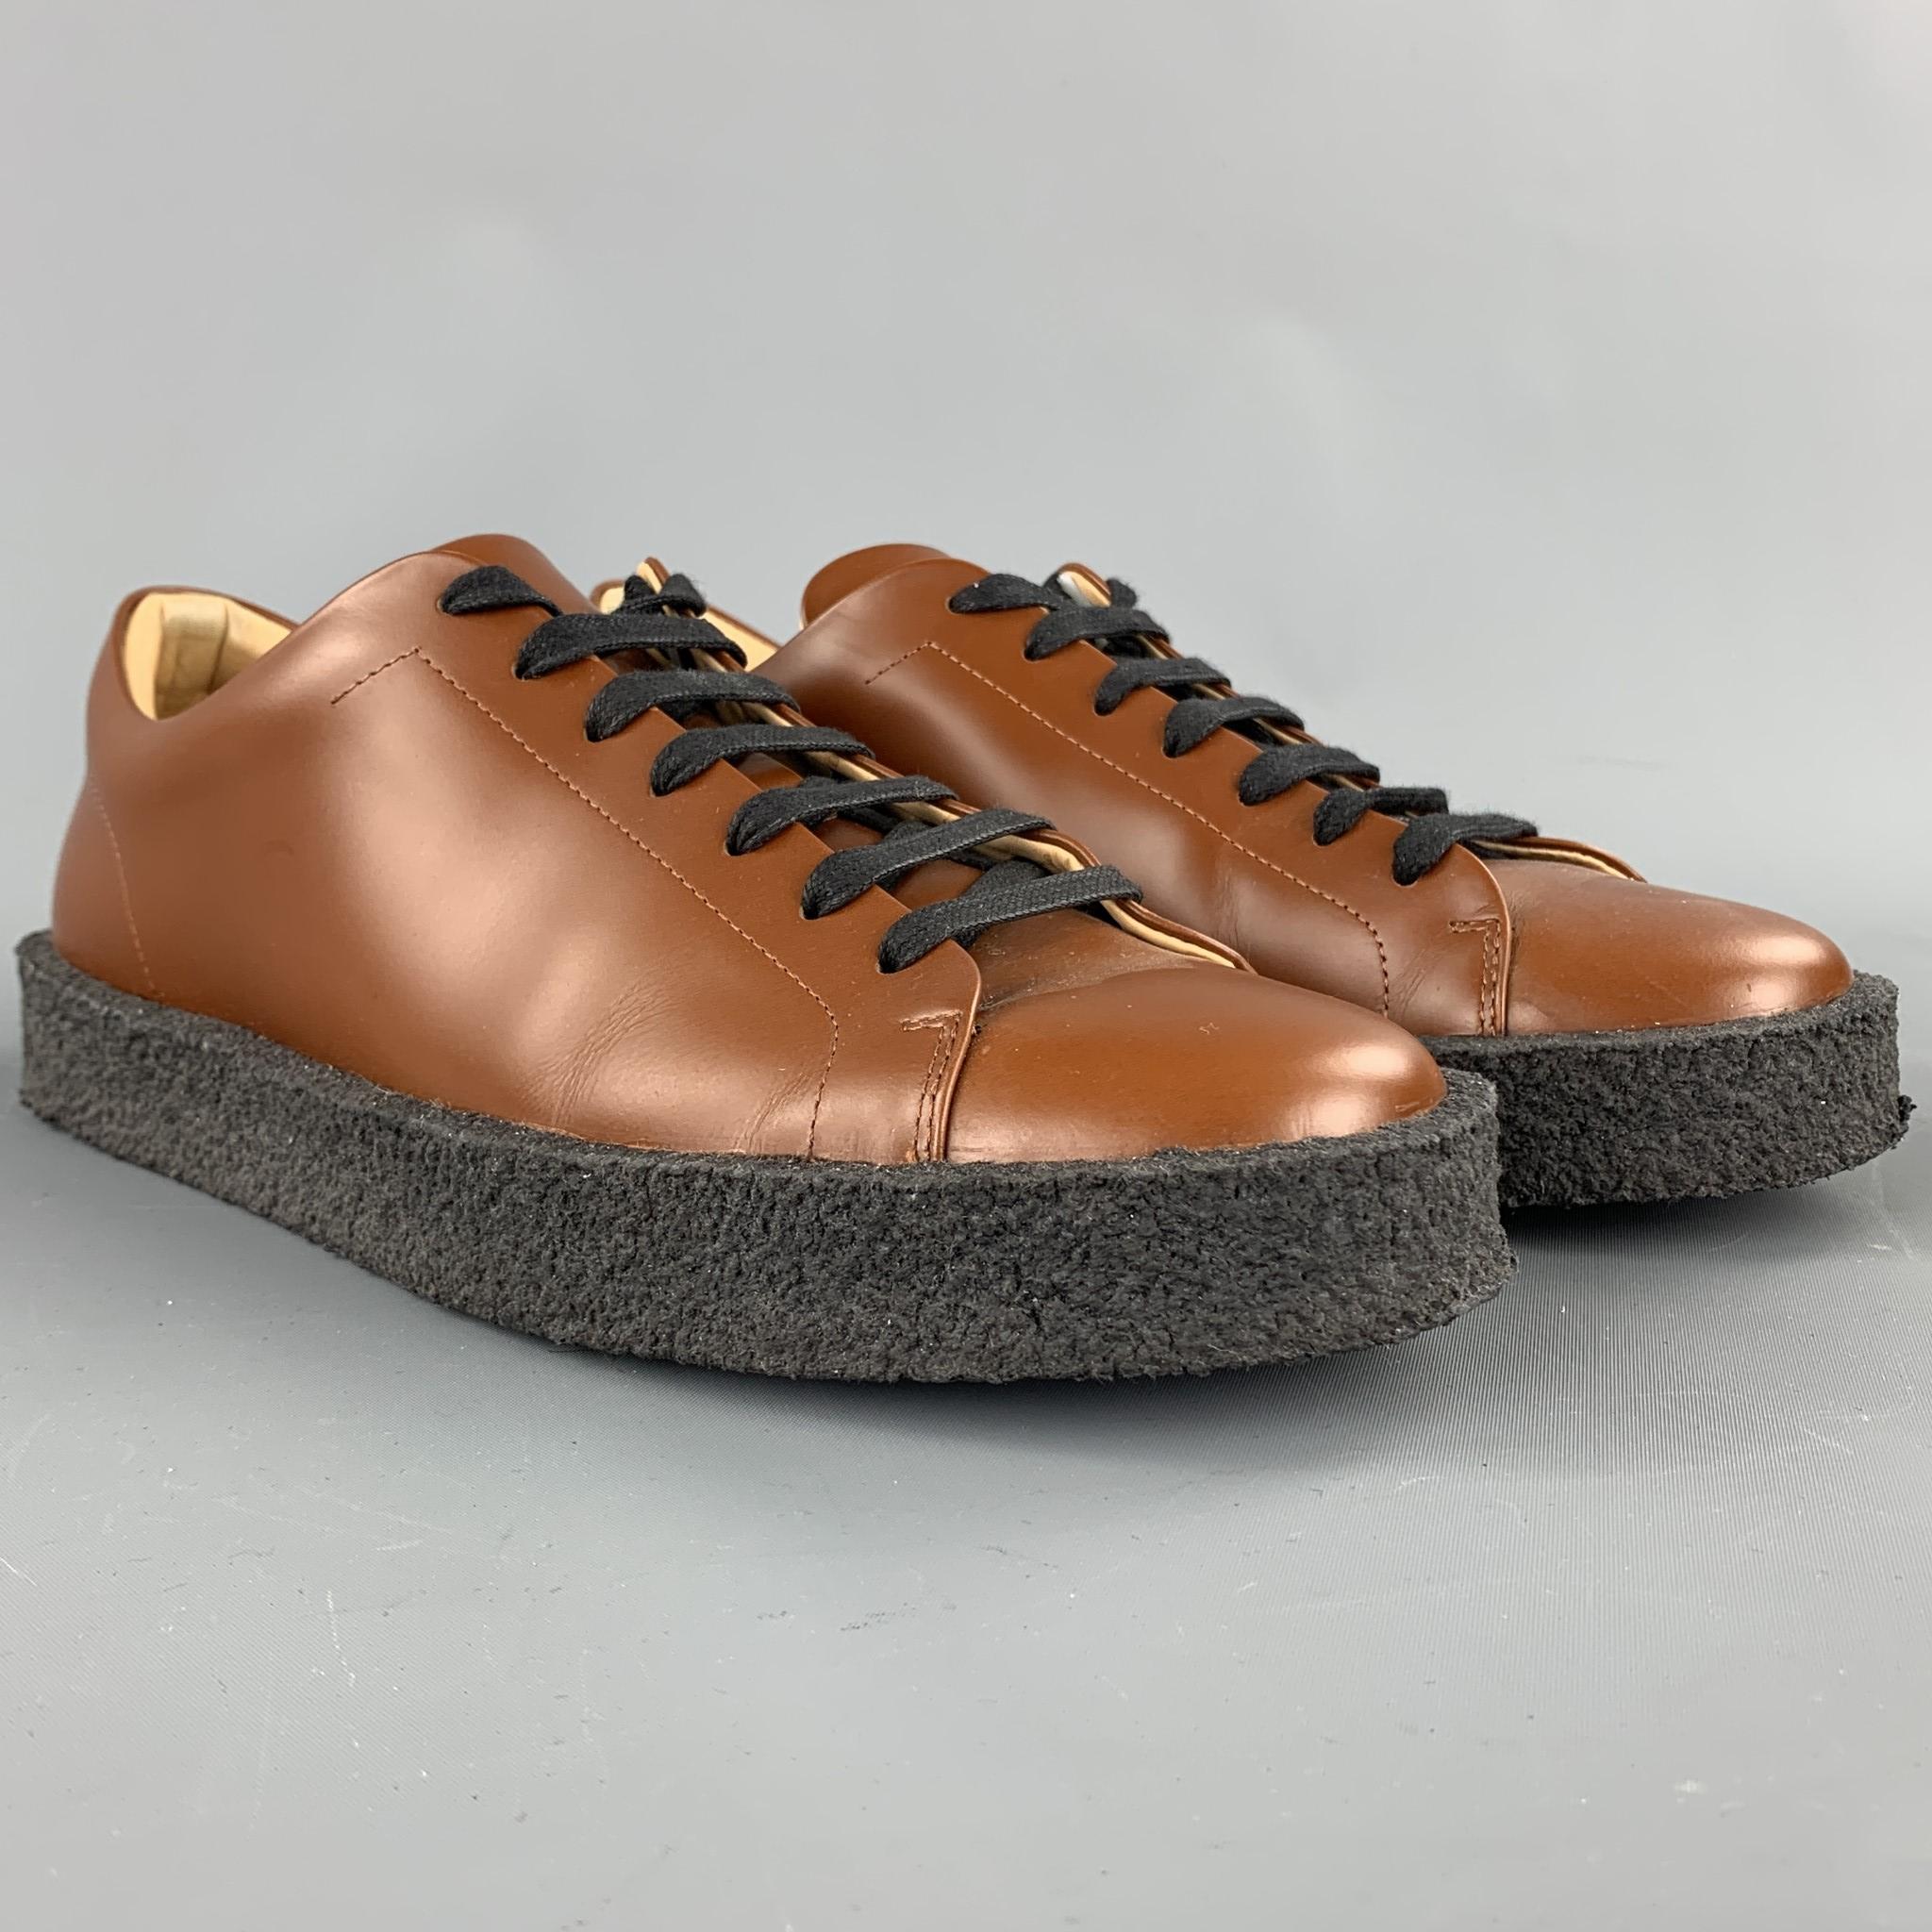 JIL SANDER shoes comes in a whiskey brown leather featuring a rubber sole and a lace up closure. Comes with box. Made in Italy.

Excellent Pre-Owned Condition.
Marked: EU 43

Outsole:

12 in. x 4 in. 